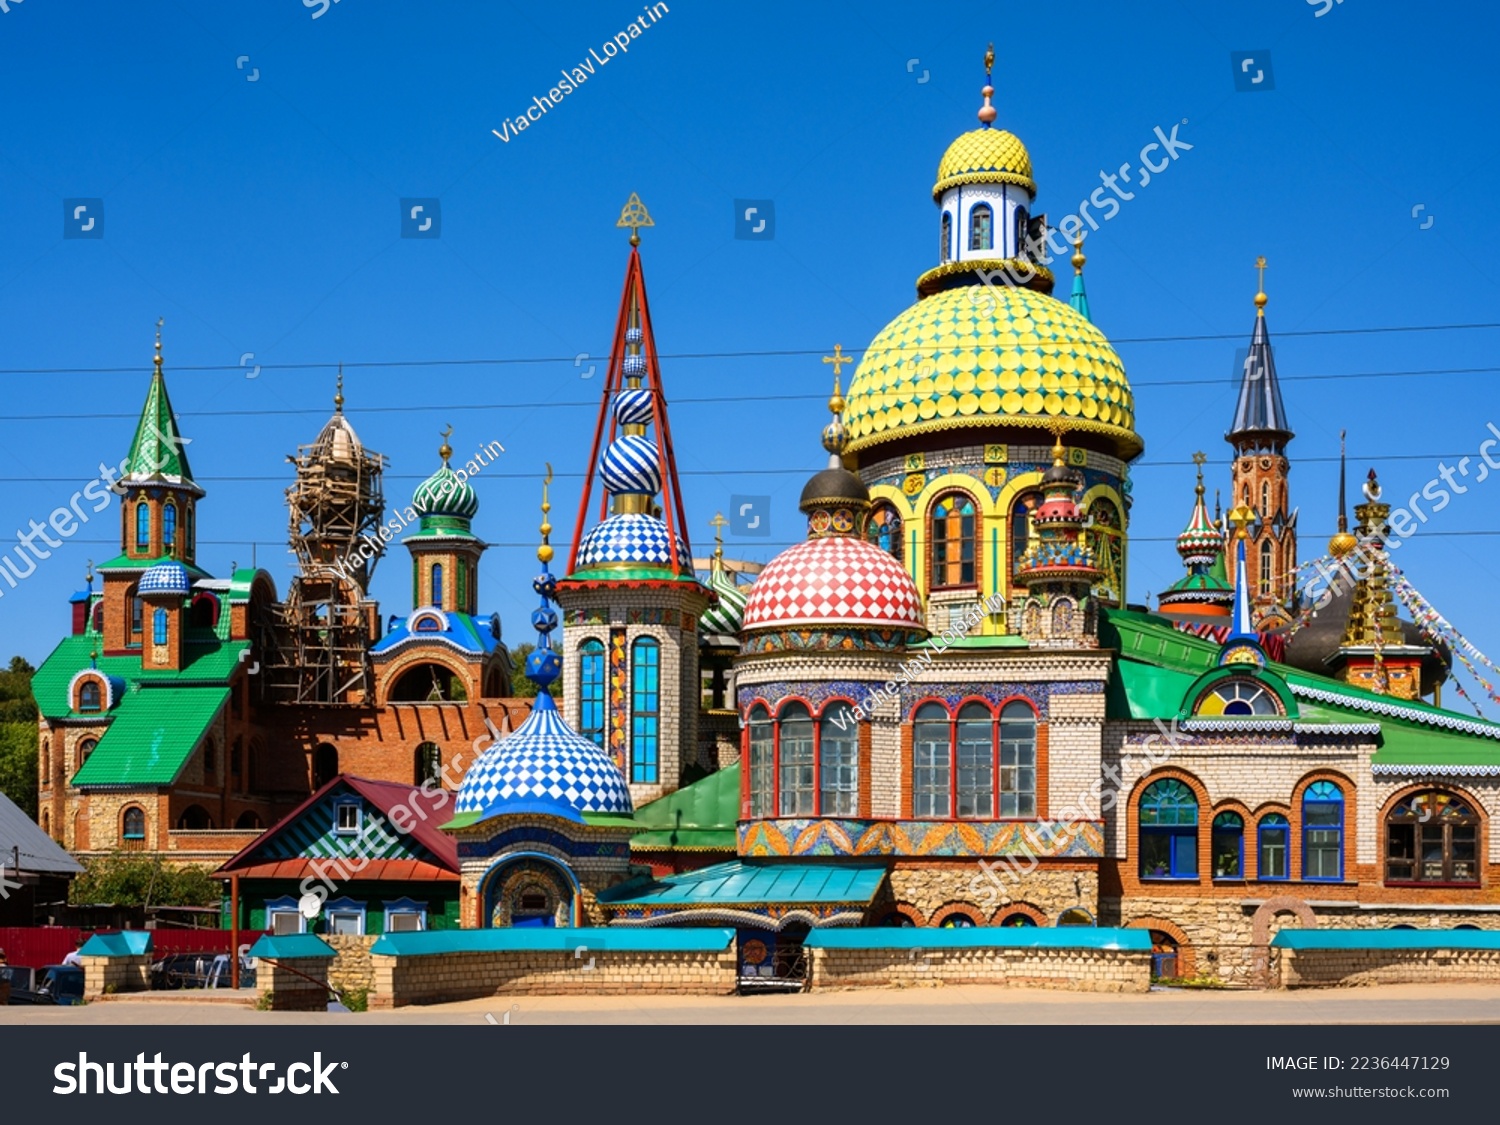 All Religions temple in Kazan, Tatarstan, Russia. It is landmark of Kazan. Panorama of beautiful colorful complex of churches, mosques and other places of worship. Theme of tourism, travel in Kazan. #2236447129